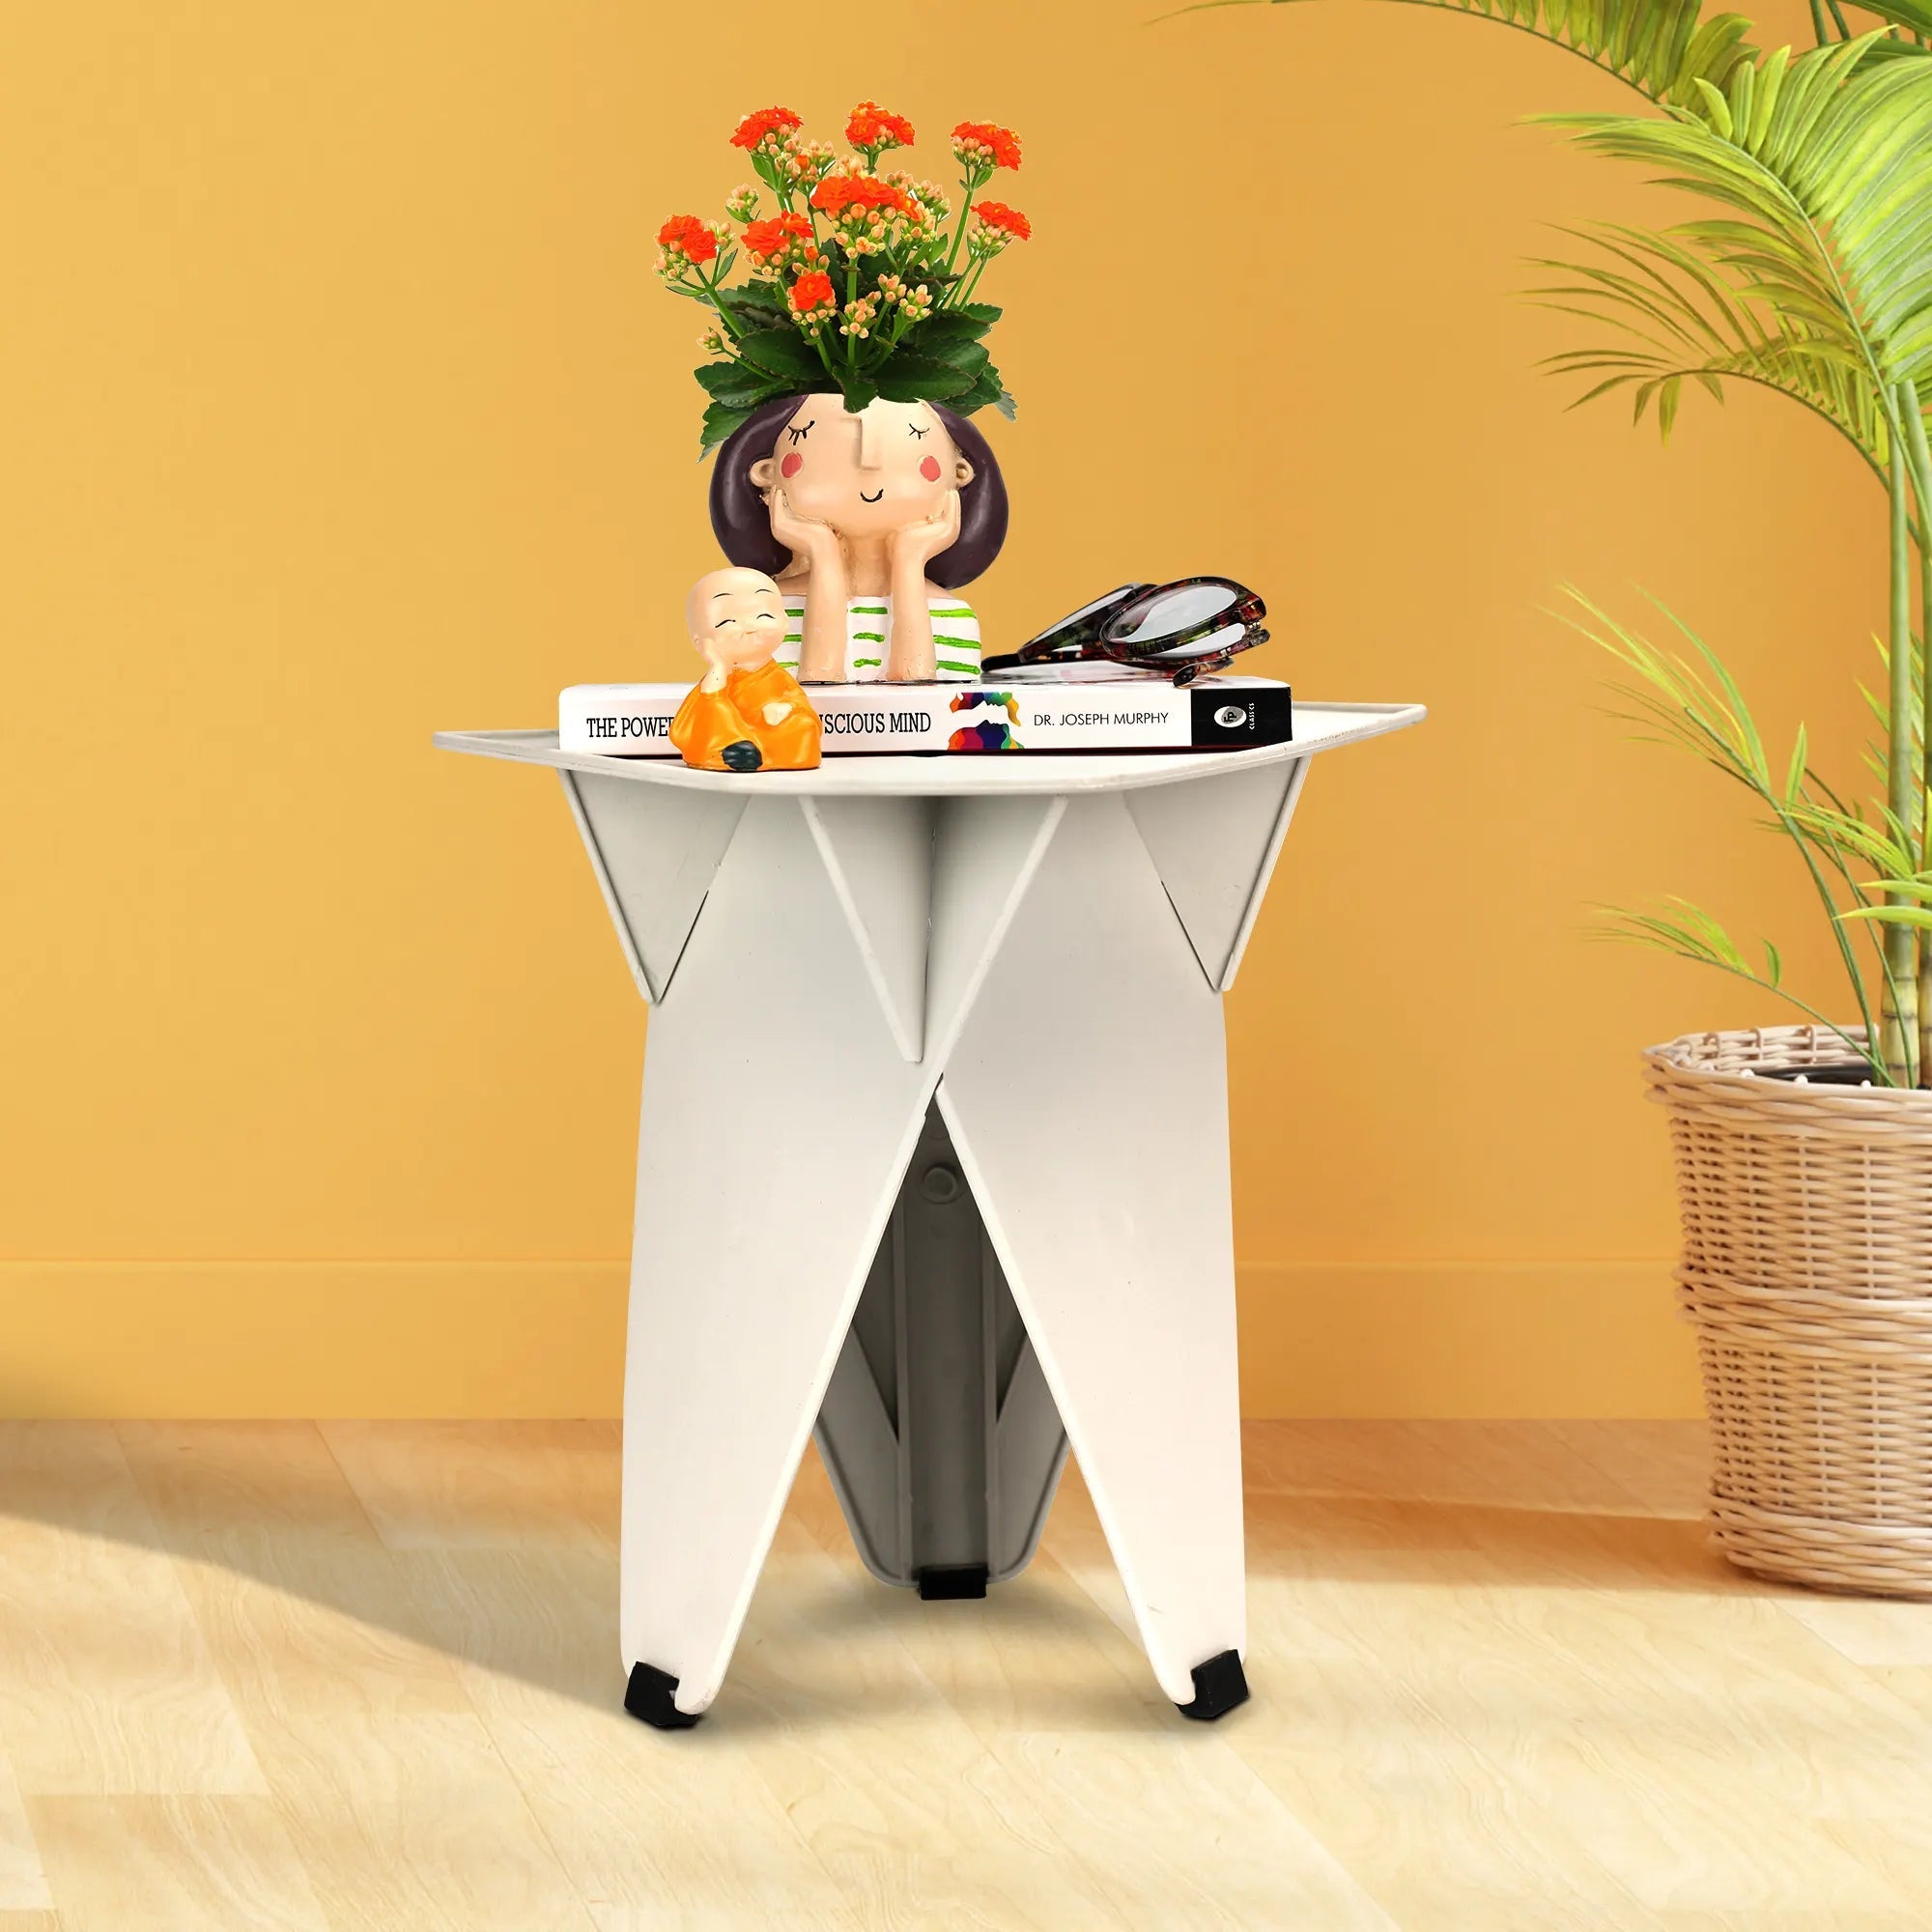 Stylish and Functional Plant Stand for Indoor Plants - Upgrade your interior design with this modern plant stand